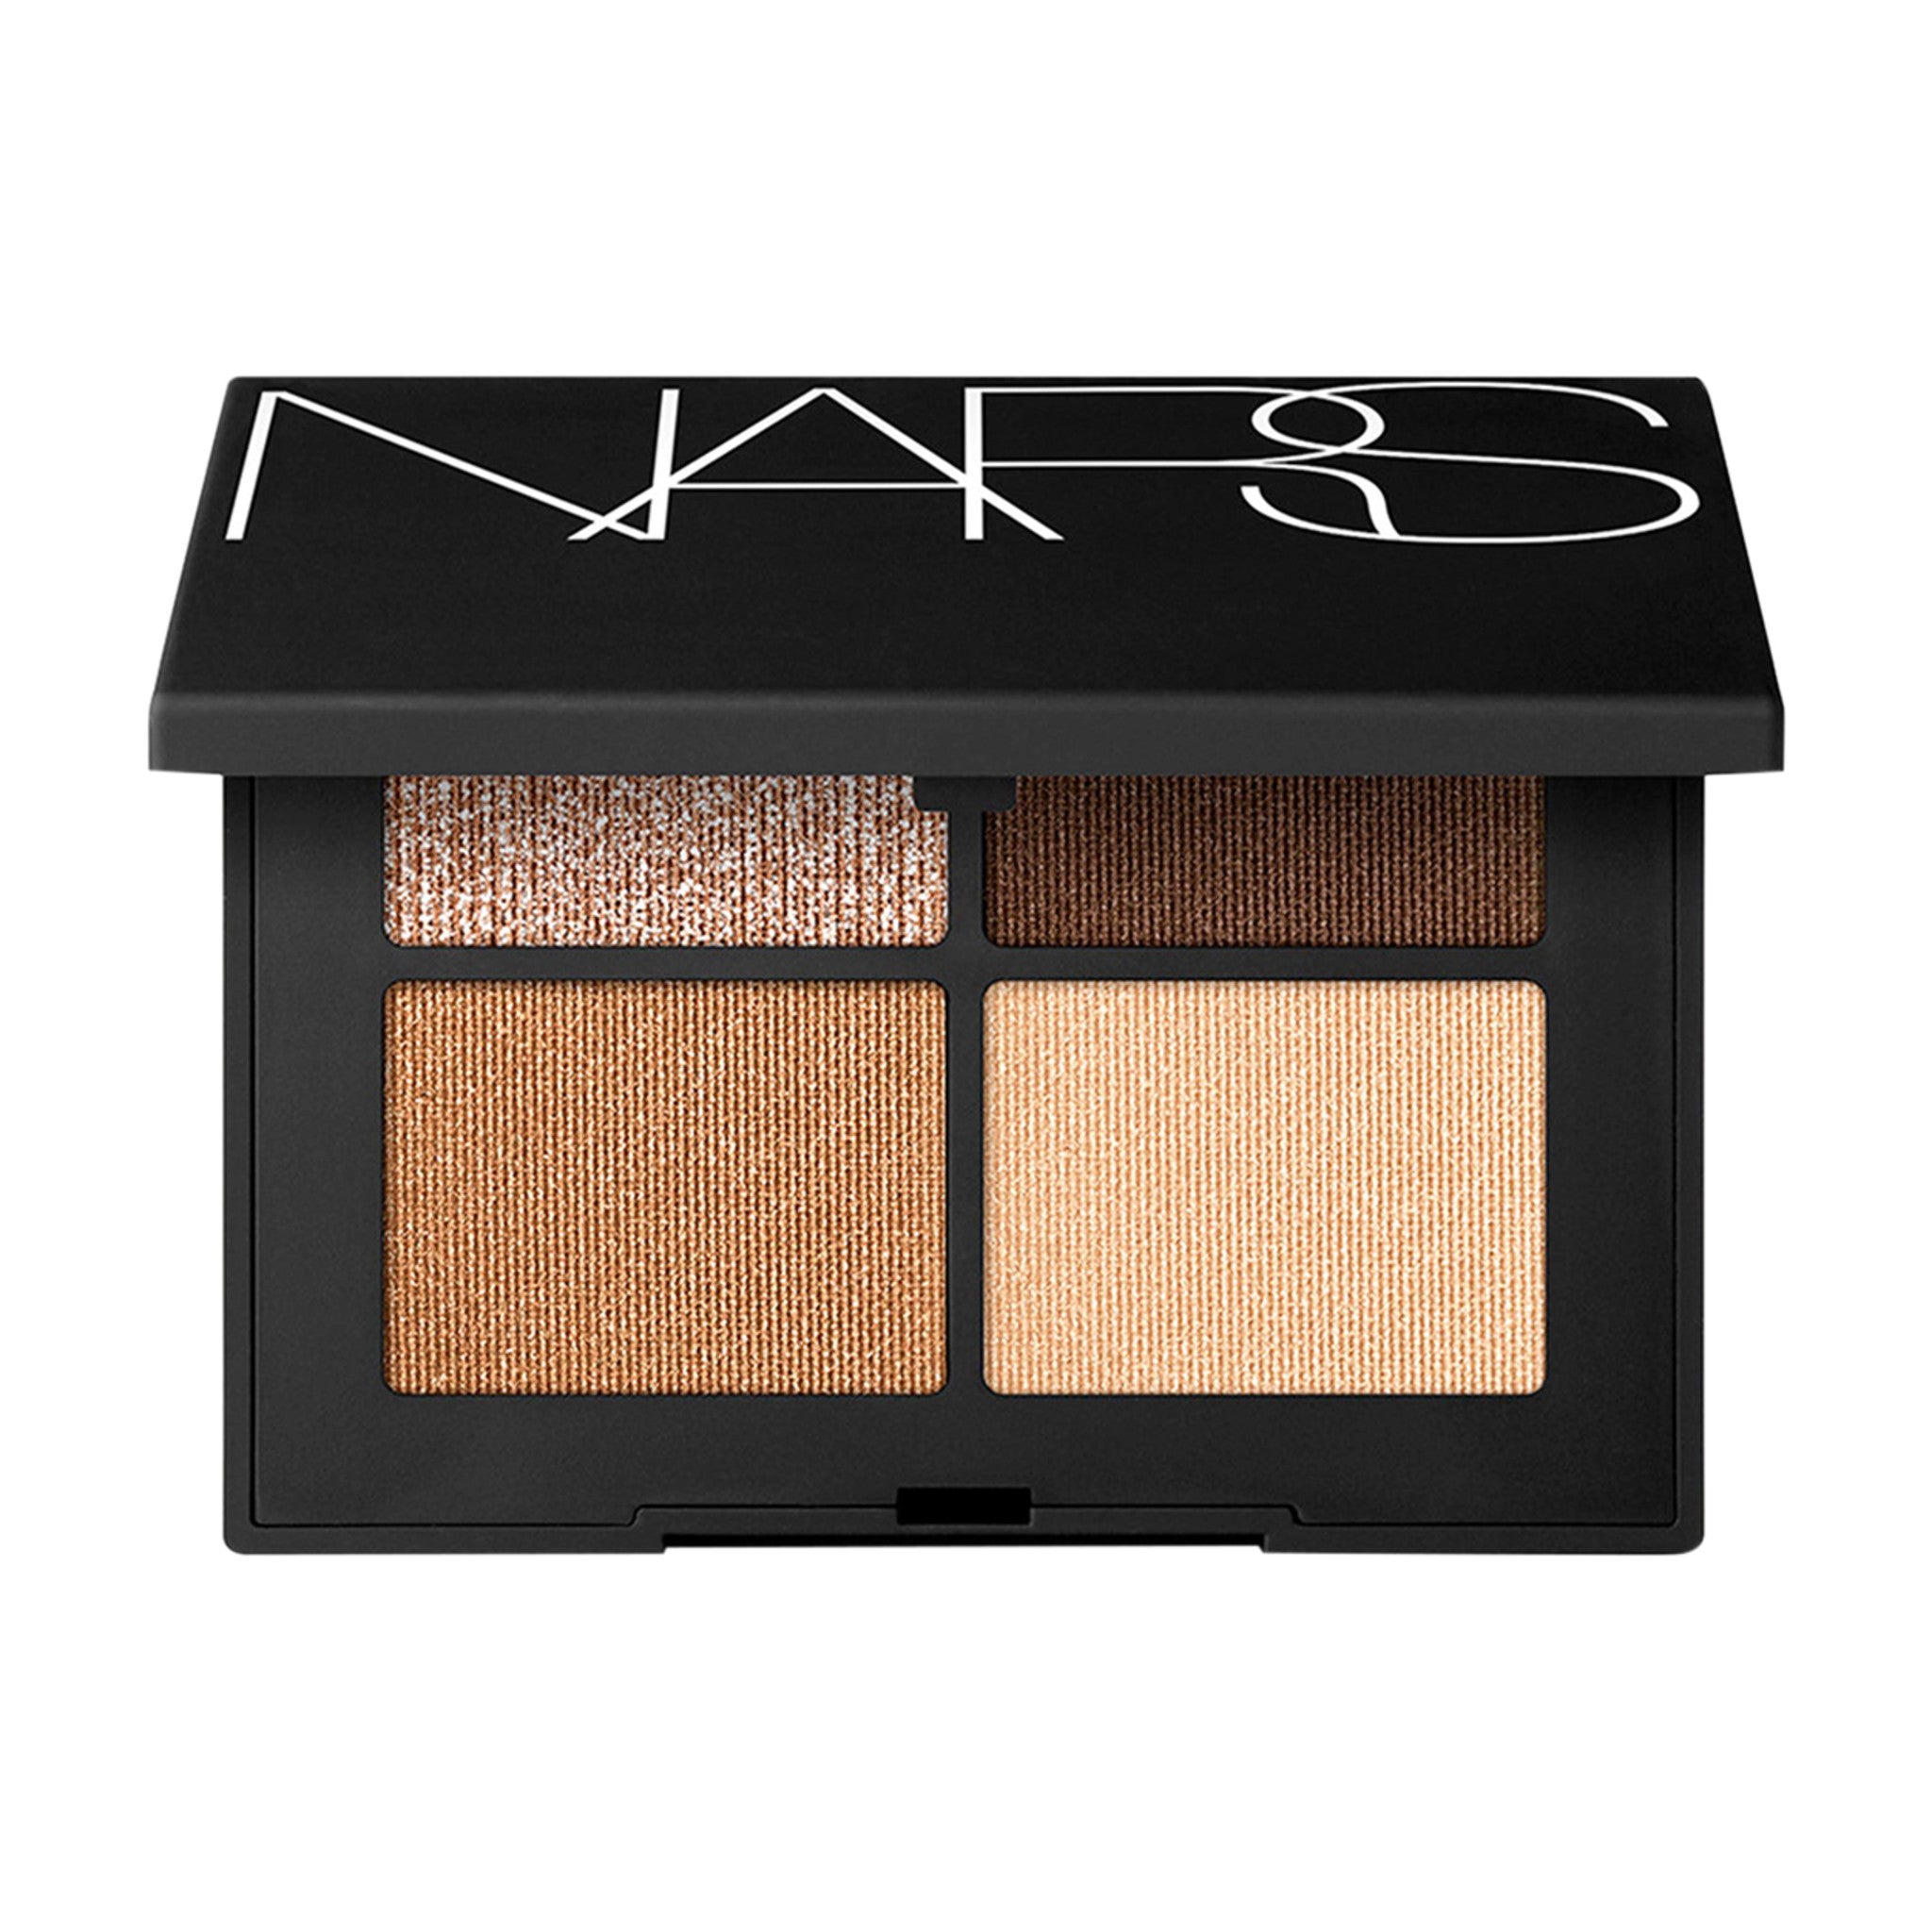 Nars Quad Eyeshadow Color/Shade variant: Mojave main image. This product is in the color multi